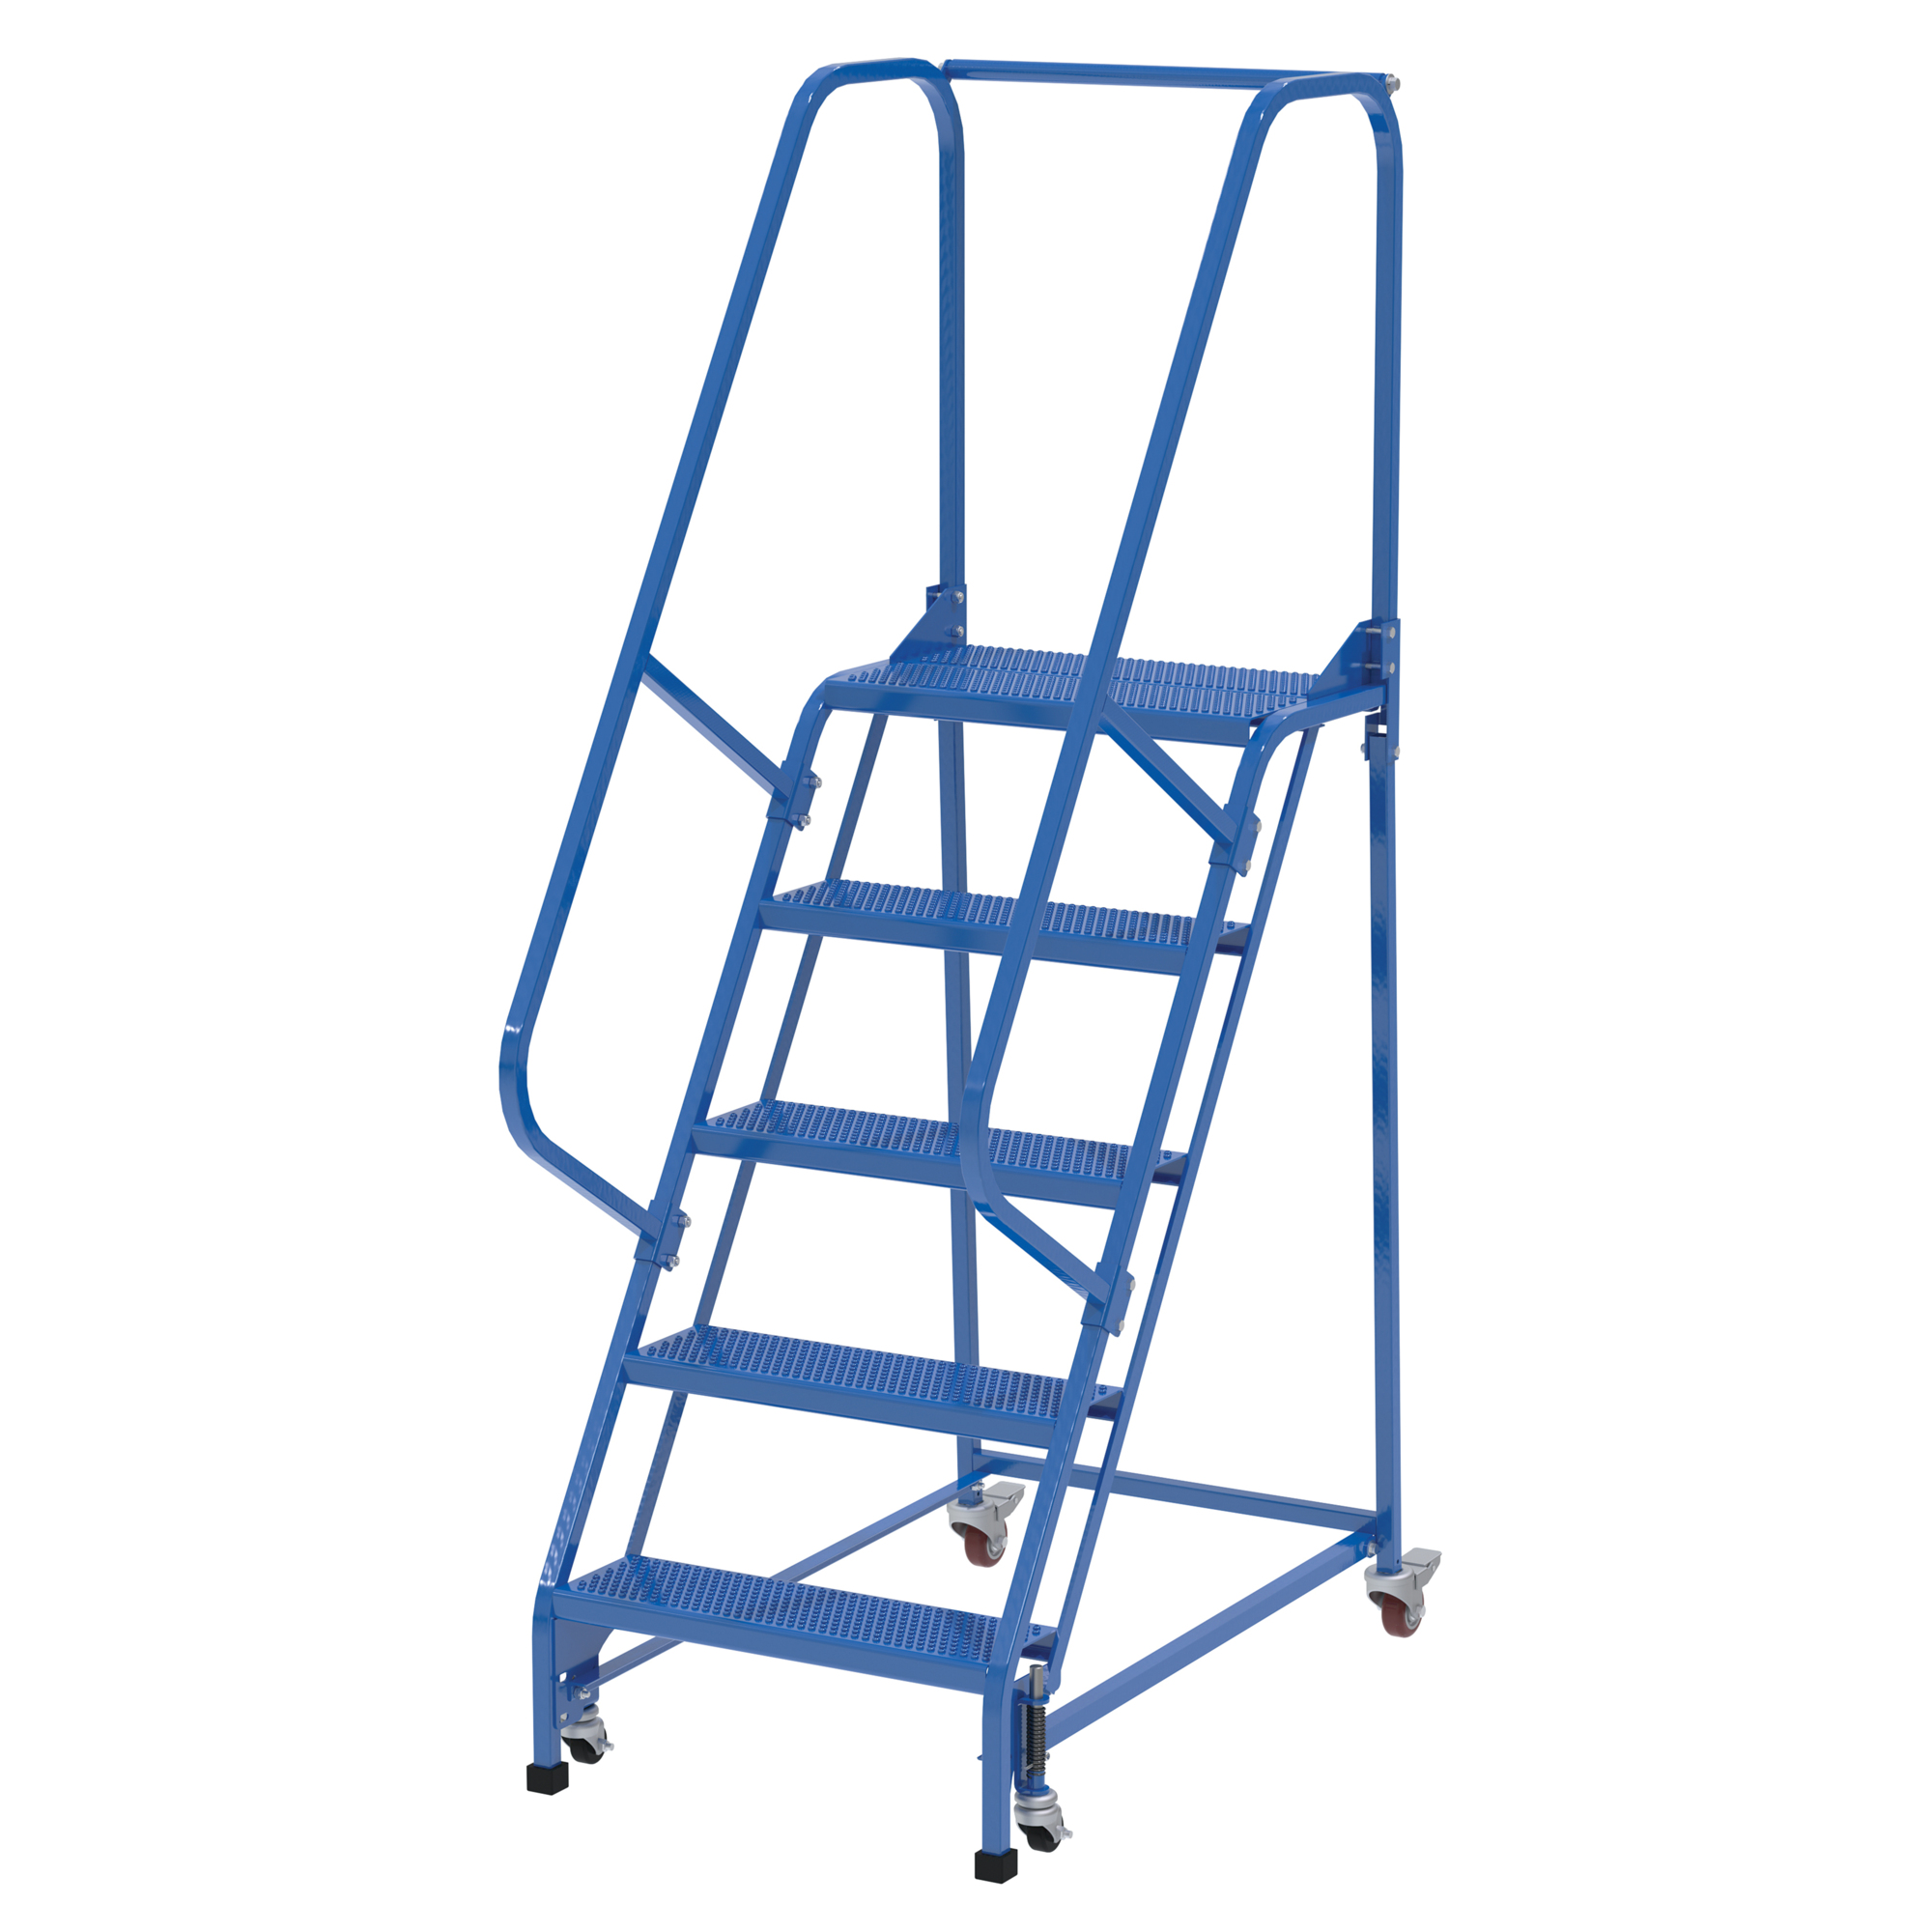 Vestil, 5 Step perforated warehouse ladder, Overall Height 80 in, Steps 5 Material Steel, Model LAD-PW-26-5-P